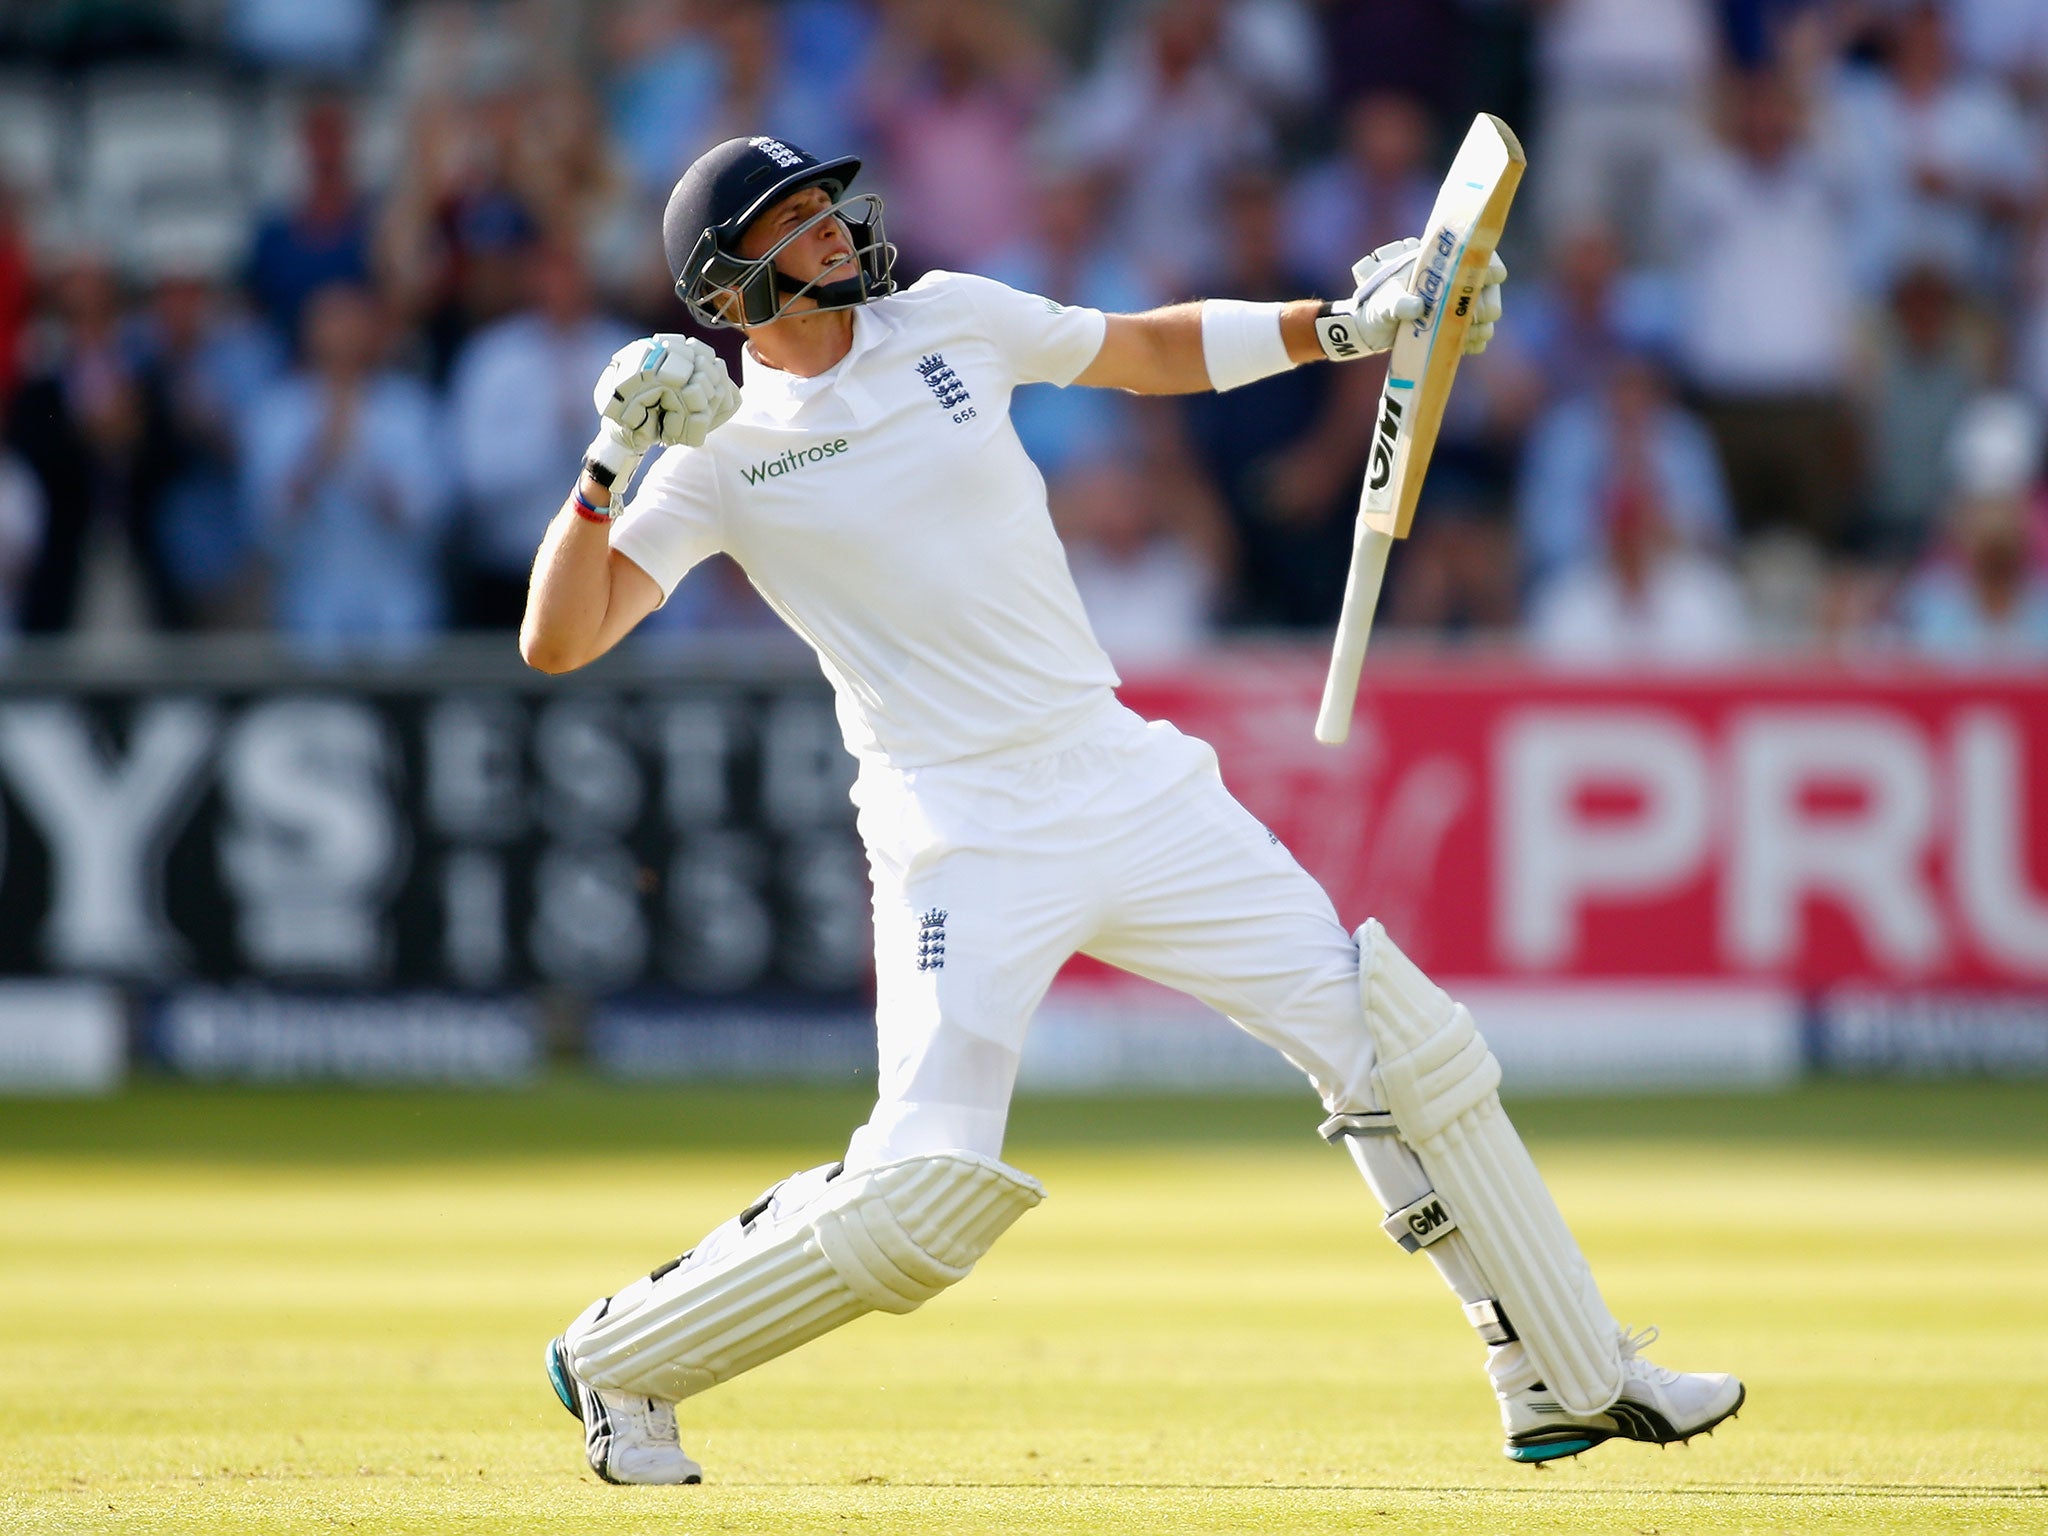 Joe Root of England celebrates reaching his century during day one of the 1st Investec Test match between England and Sri Lanka at Lord's